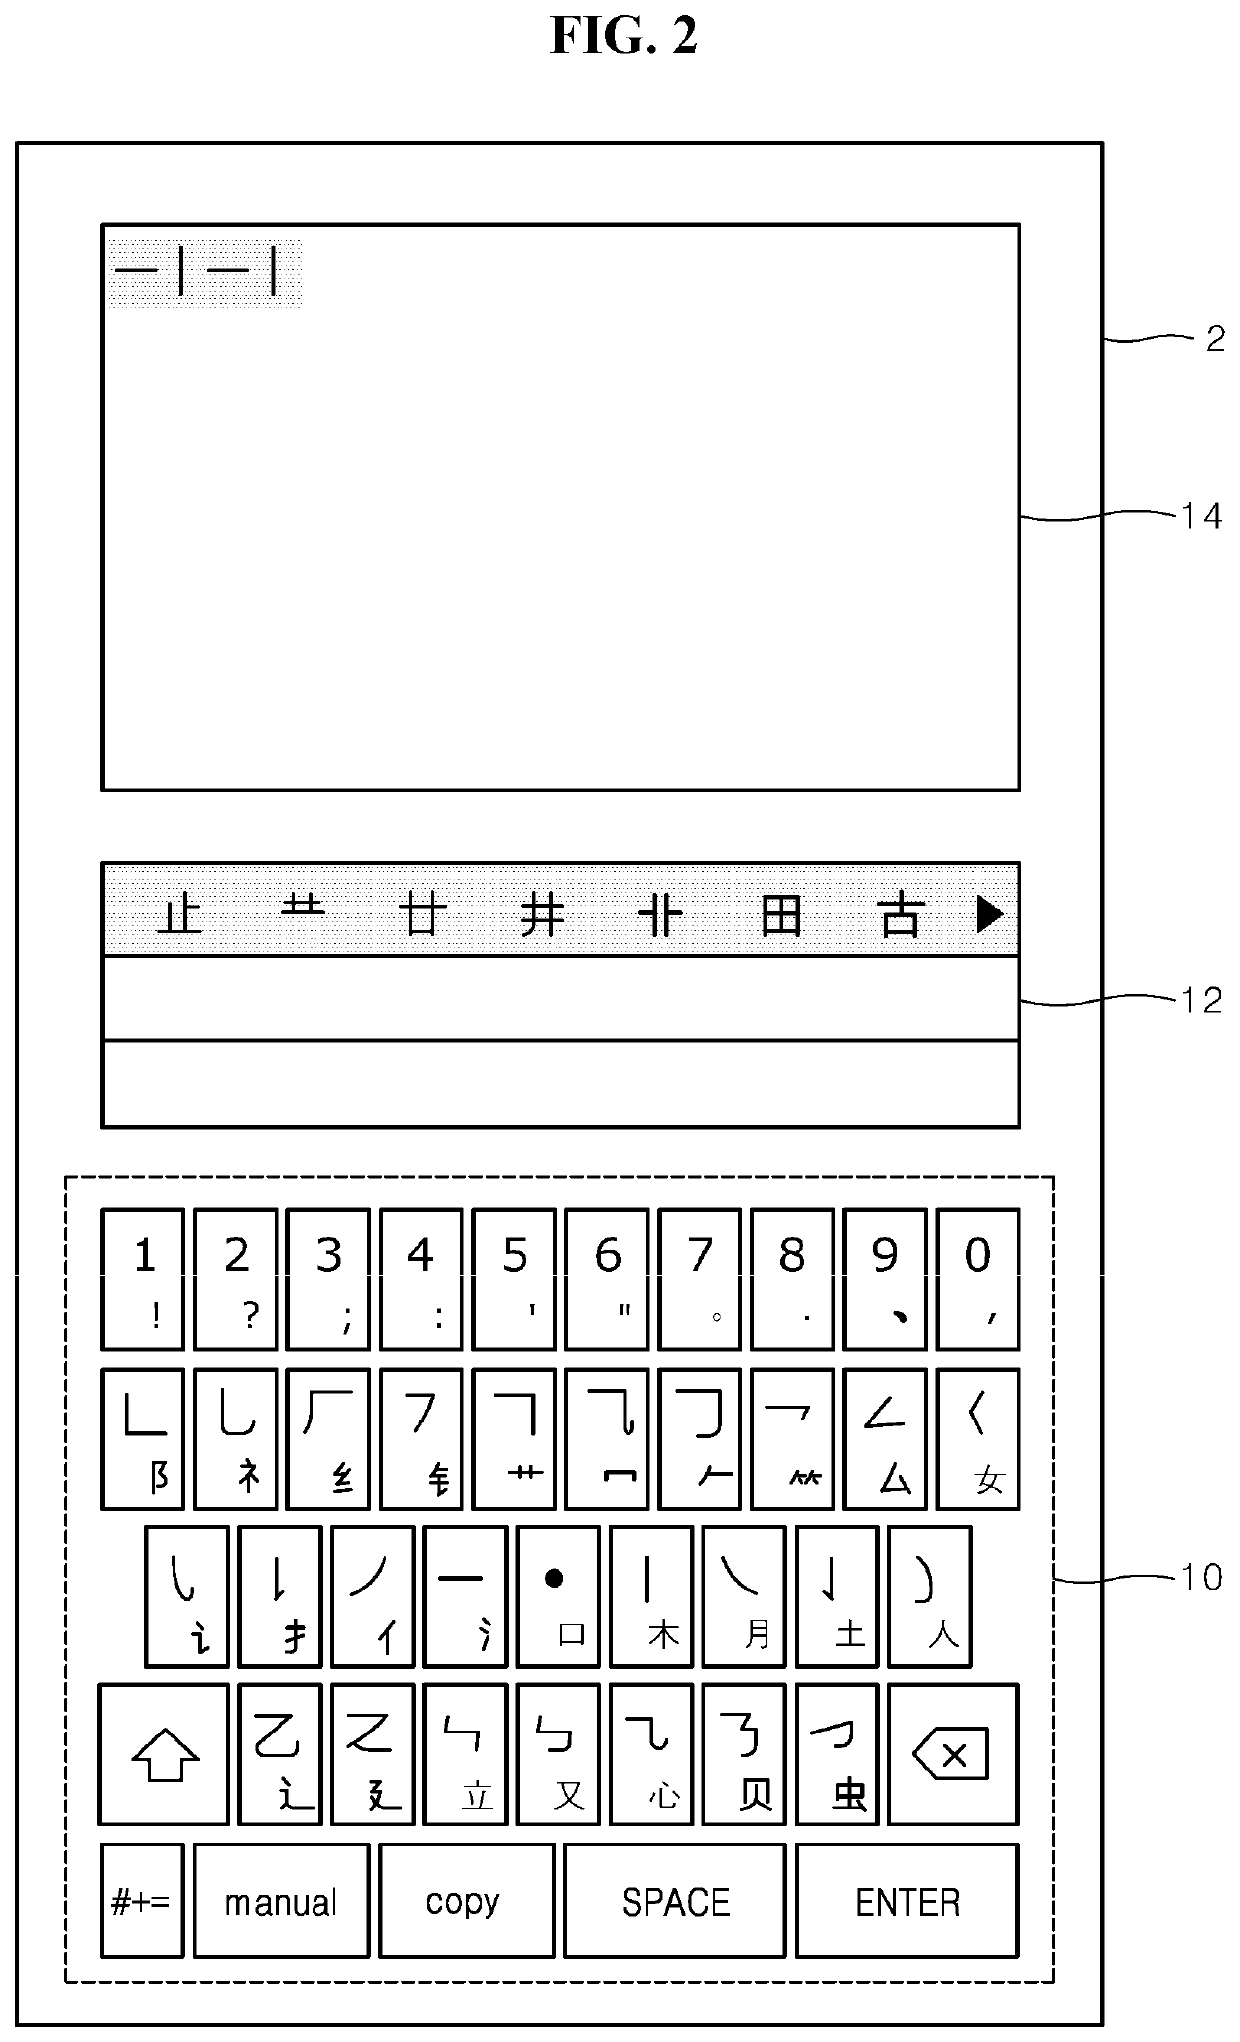 Keyboard for typing Chinese character